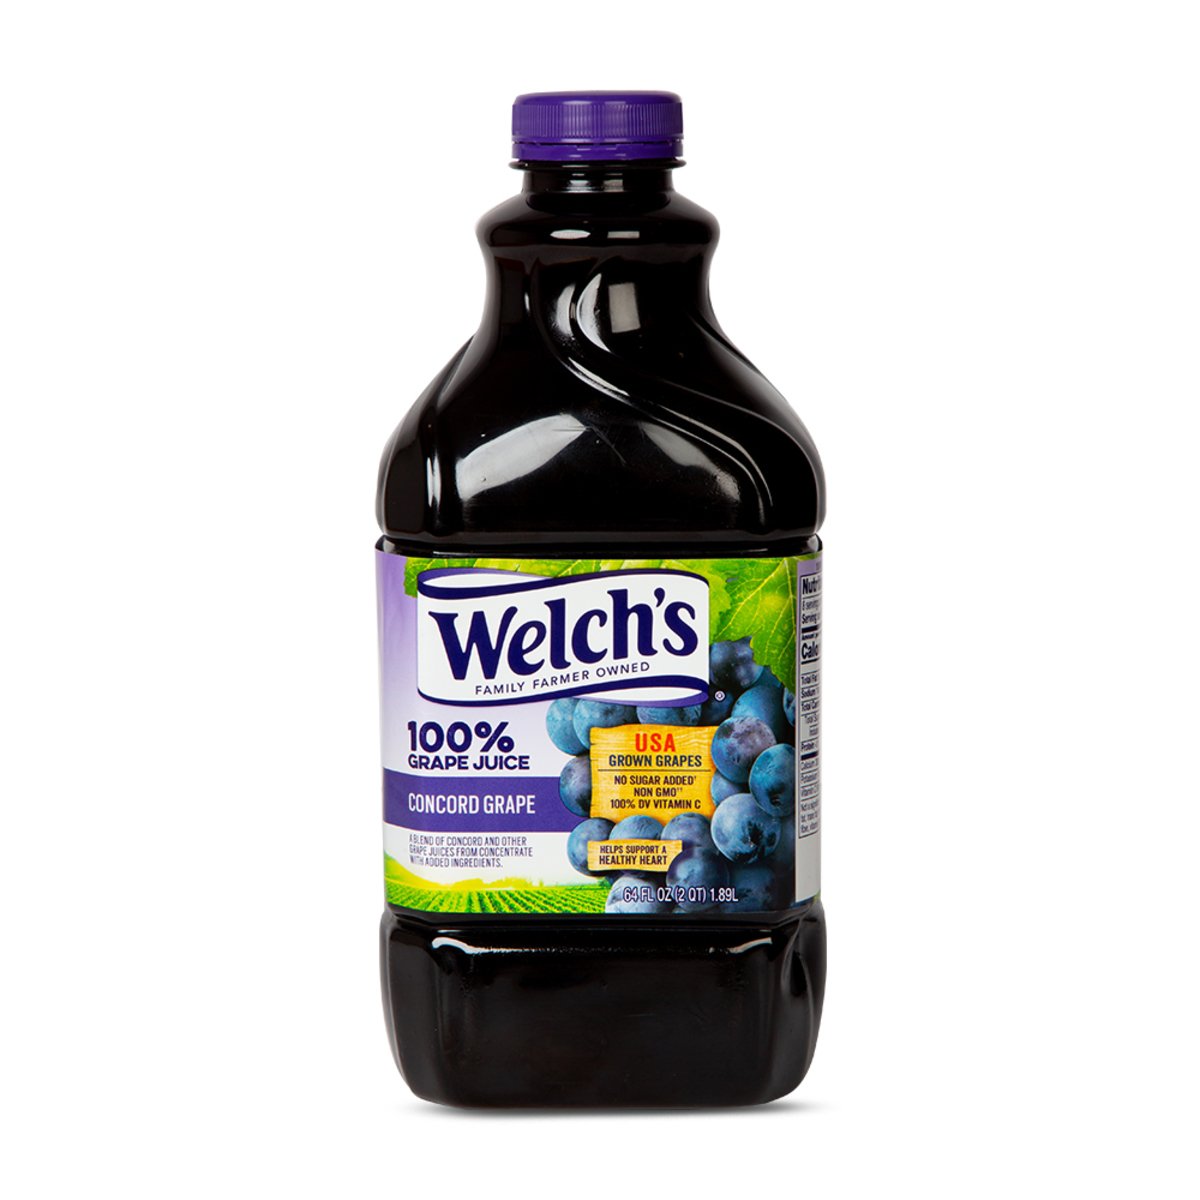 Welch's 100% Concord Grape Juice 1.89 Litres